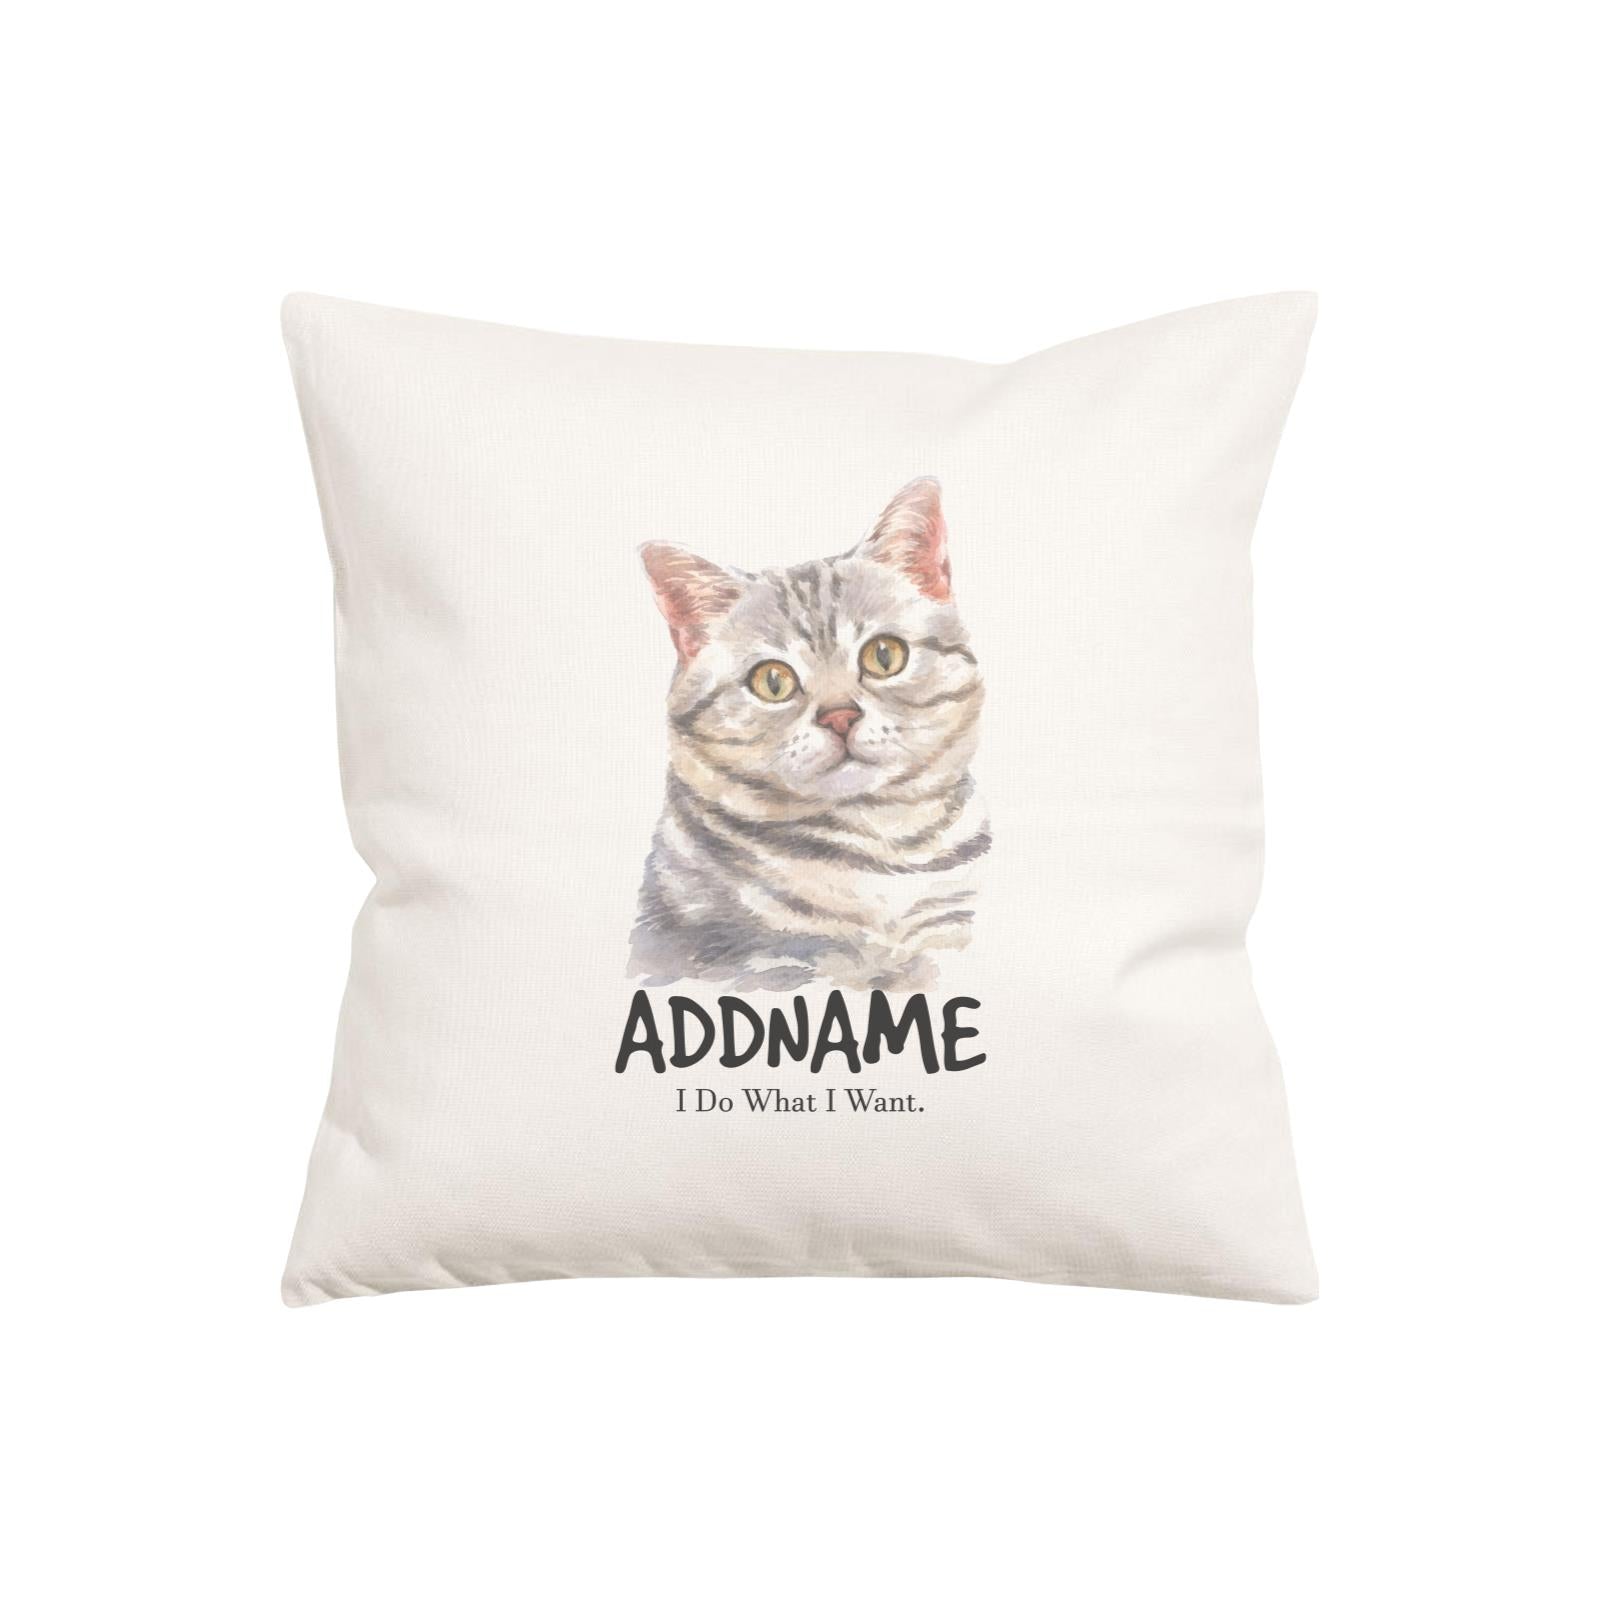 Watercolor Cat Series American Shorthair I Do What I Want Addname Pillow Cushion